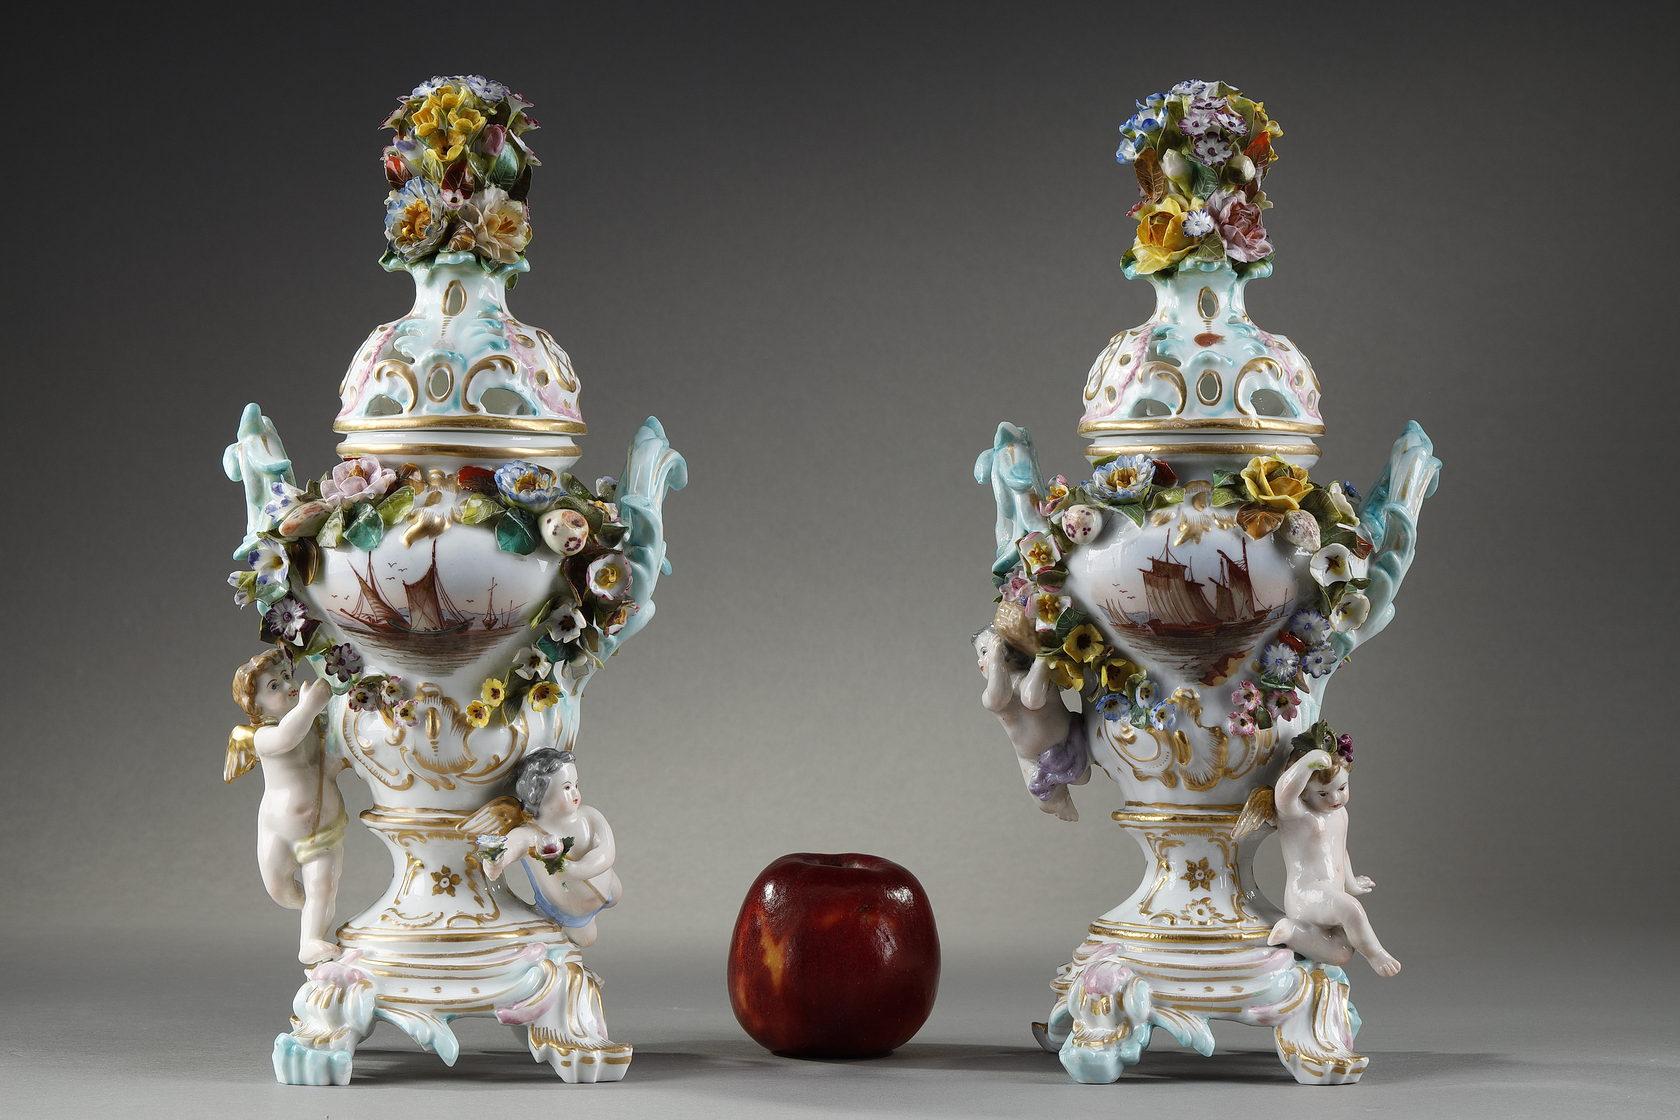 Pair of Polychrome and Gilt Porcelains from the Meissen Manufacture 14